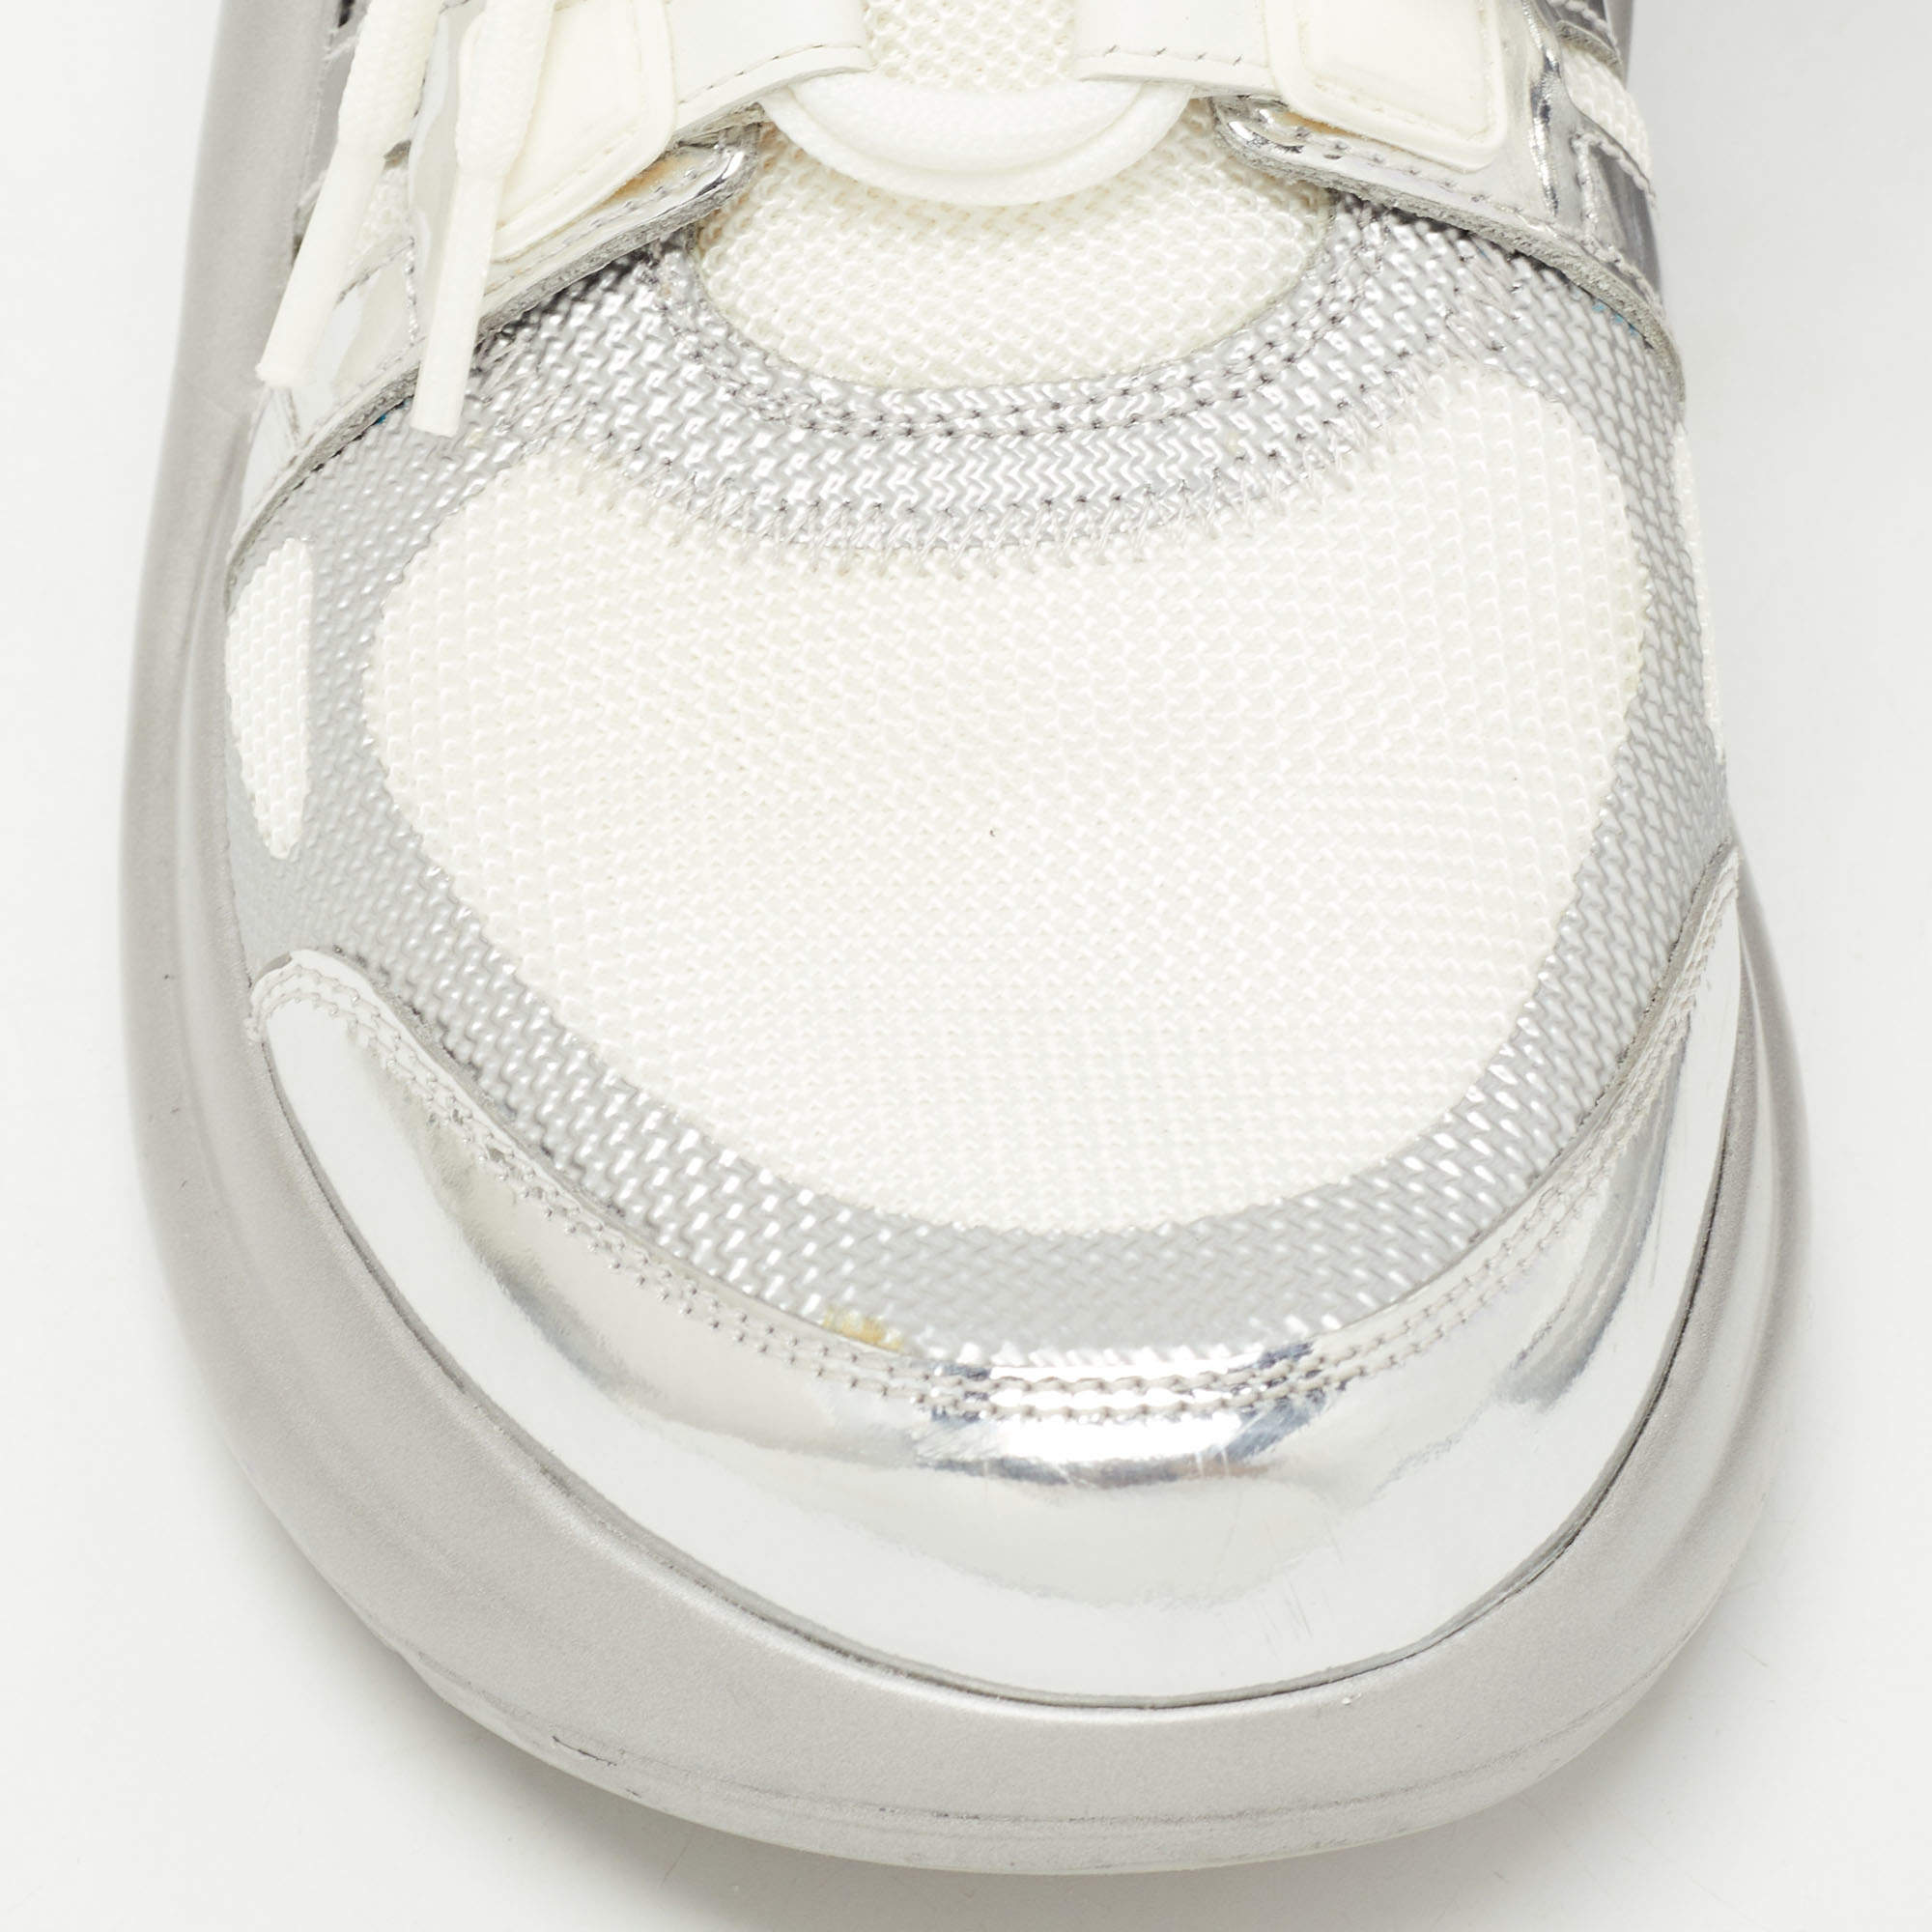 Louis Vuitton Silver/White Leather and Mesh Archlight Sneakers Size 39  Louis Vuitton